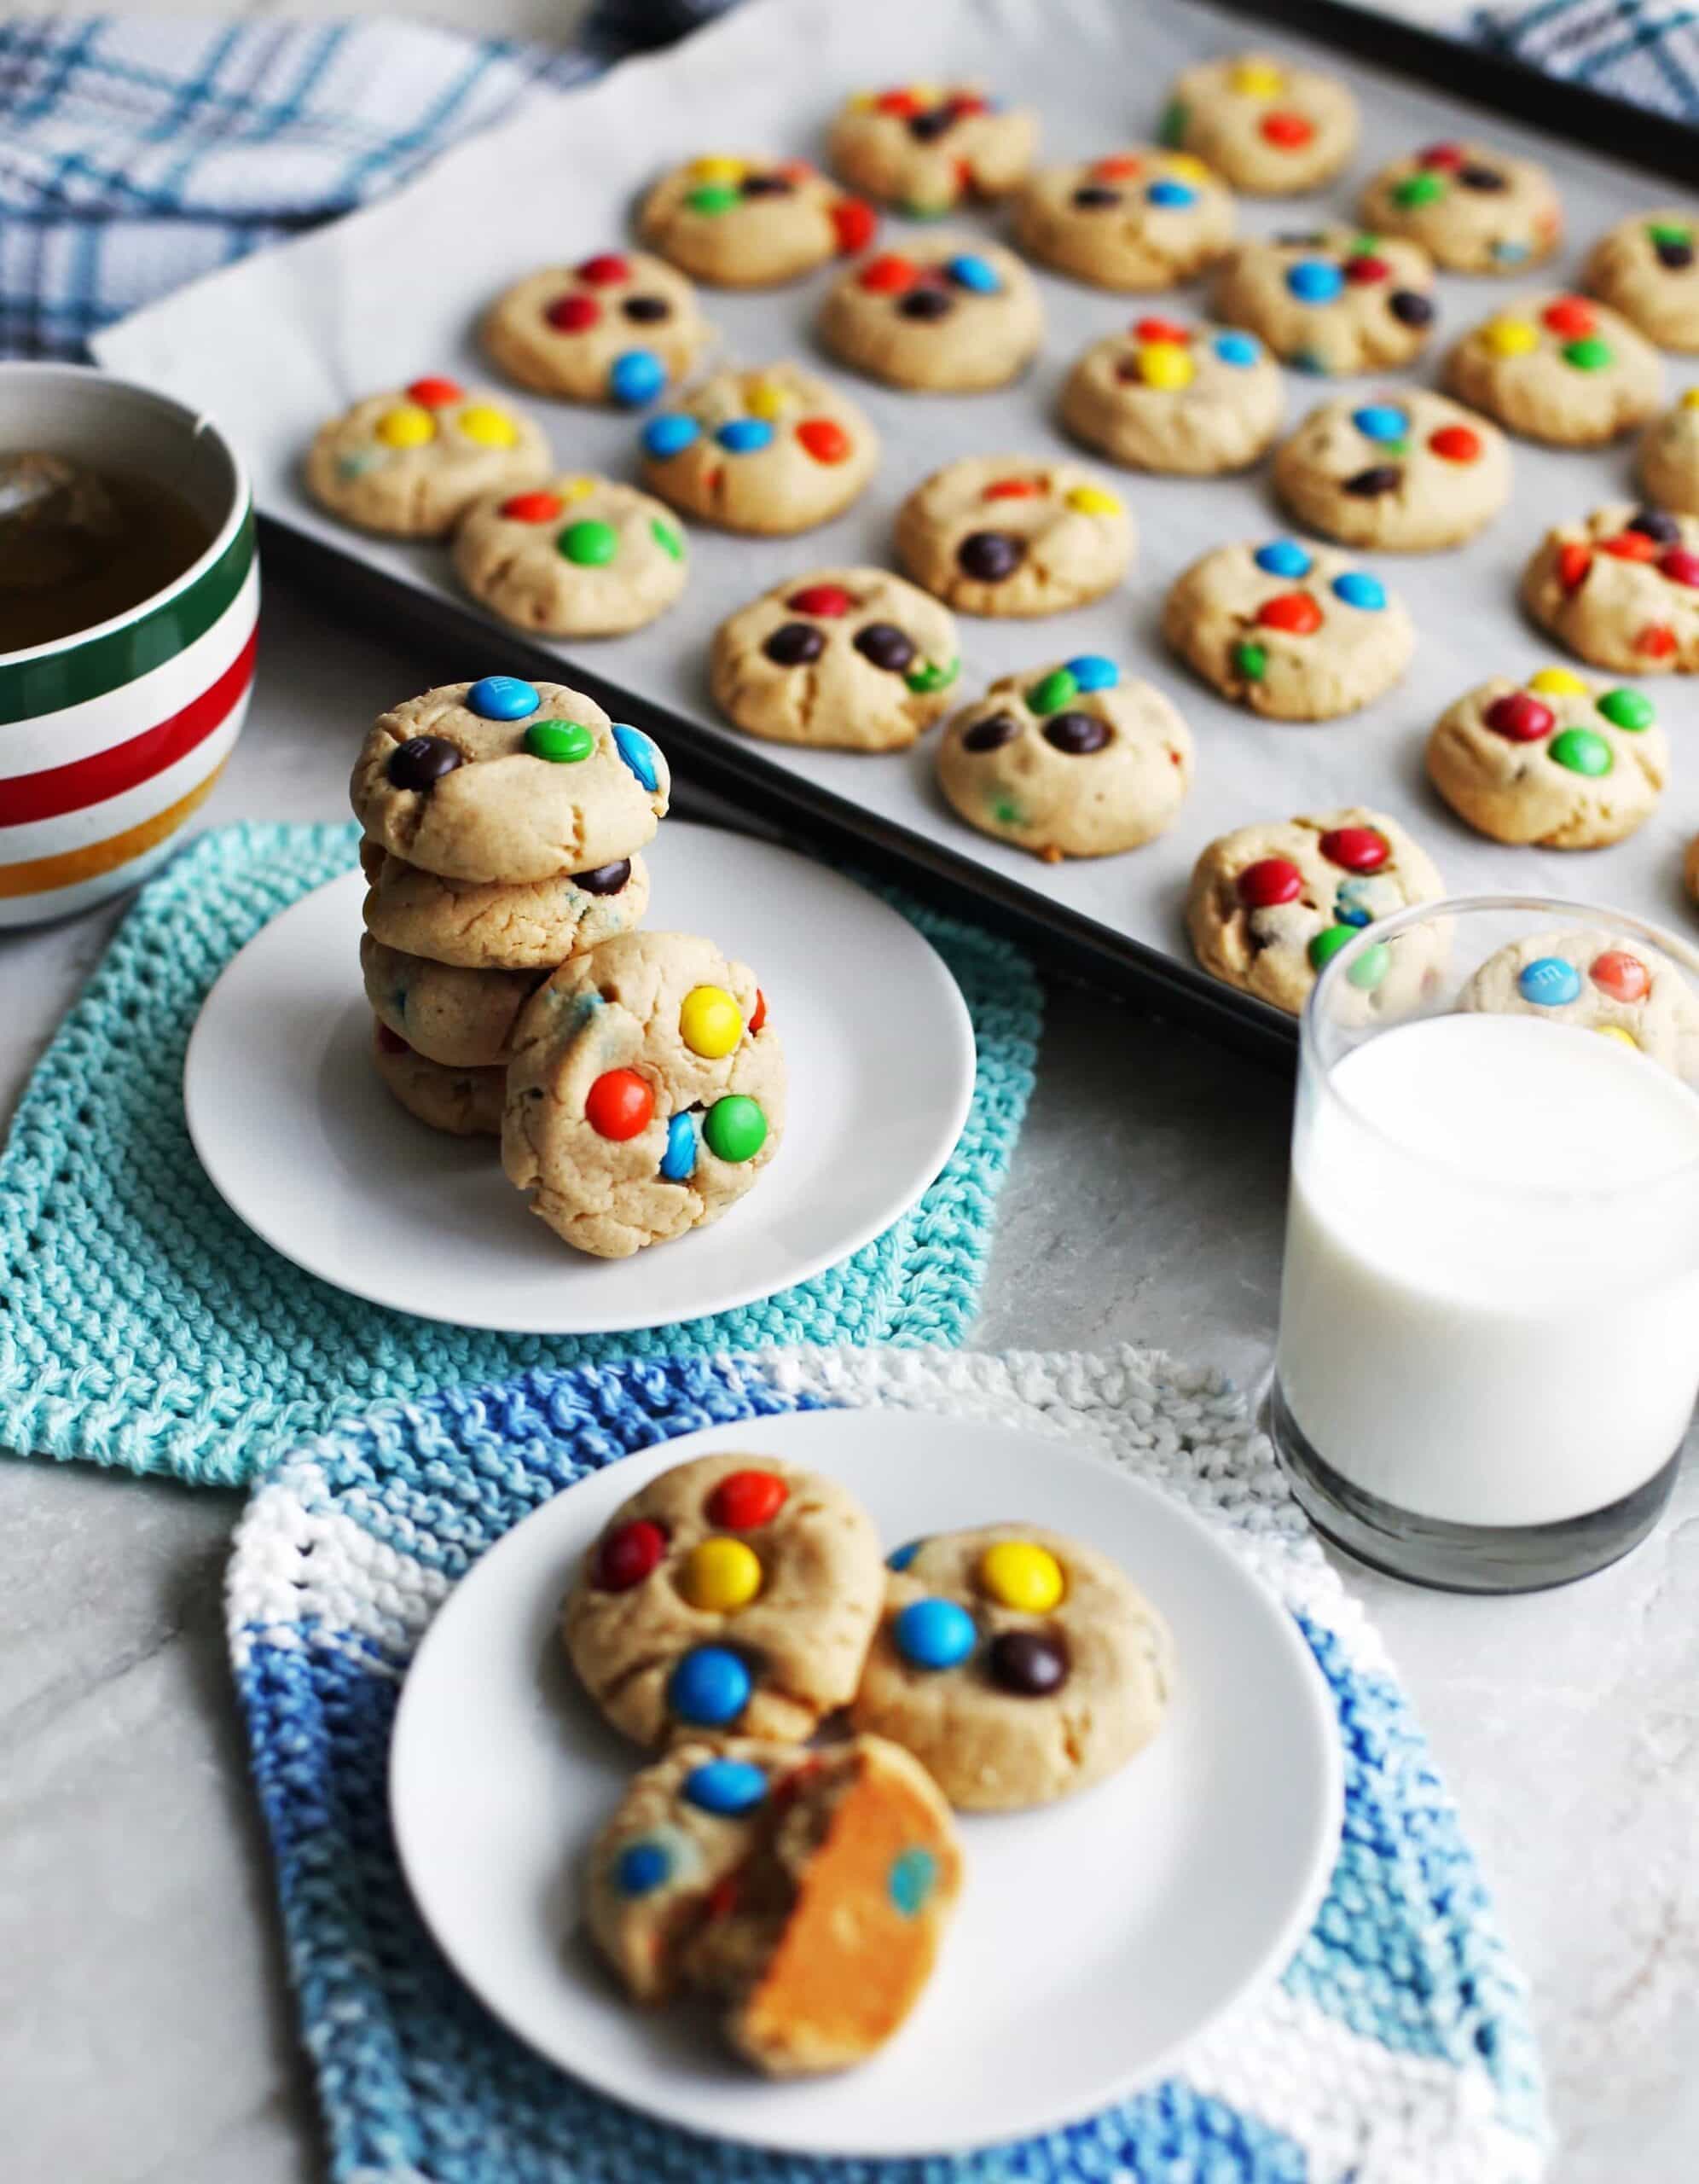 Chewy Peanut Butter Cookies with Chocolate M&M’s